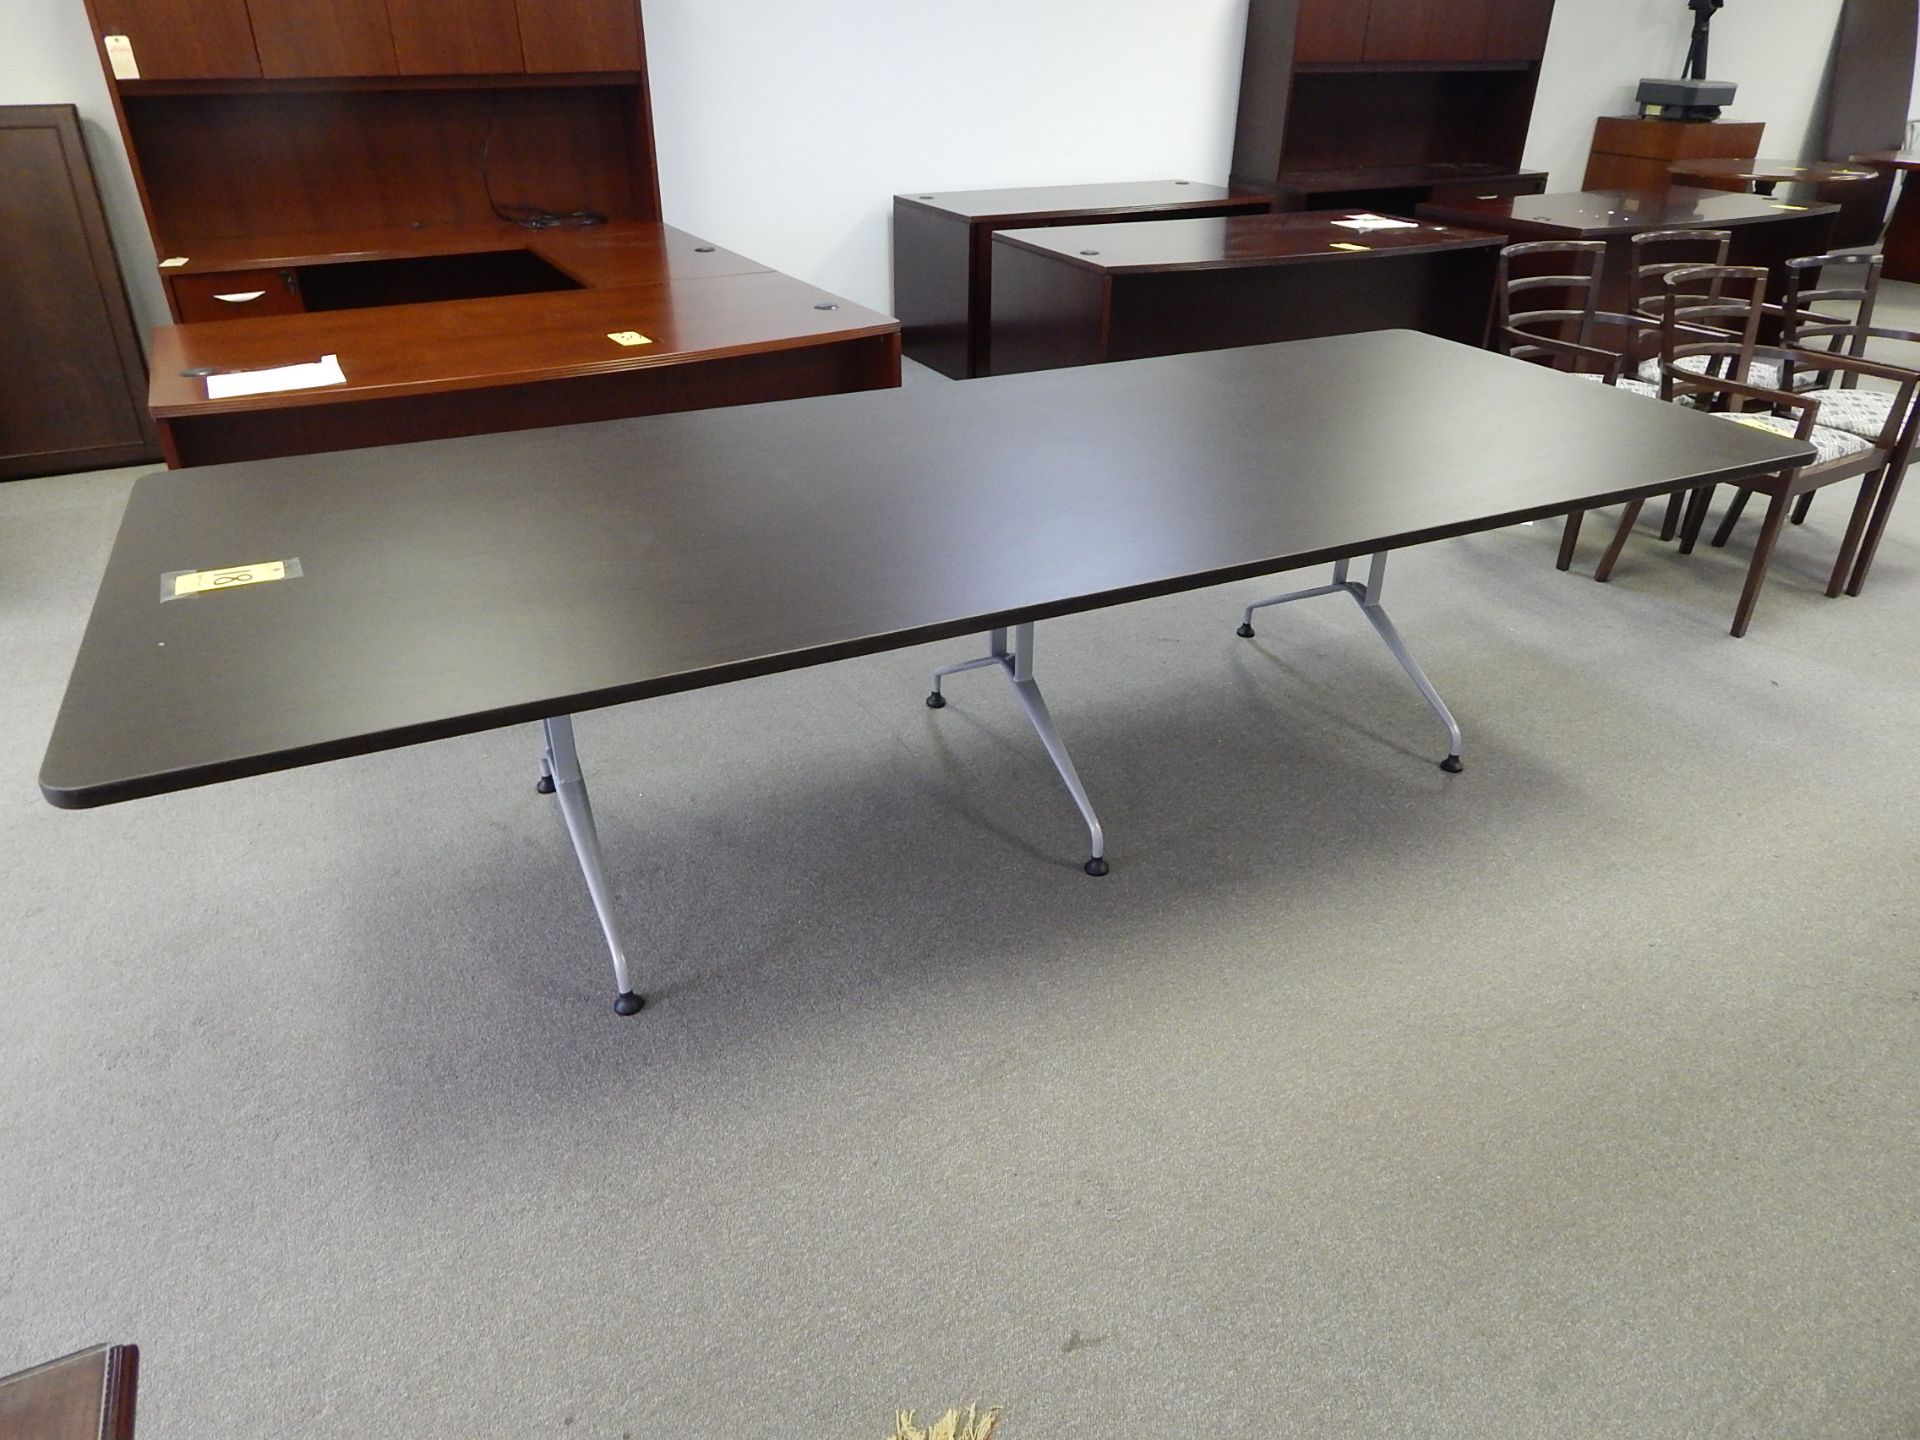 Global 10' Conference Table, 29" H x 10' Long x 48" W, Dark Espresso Color